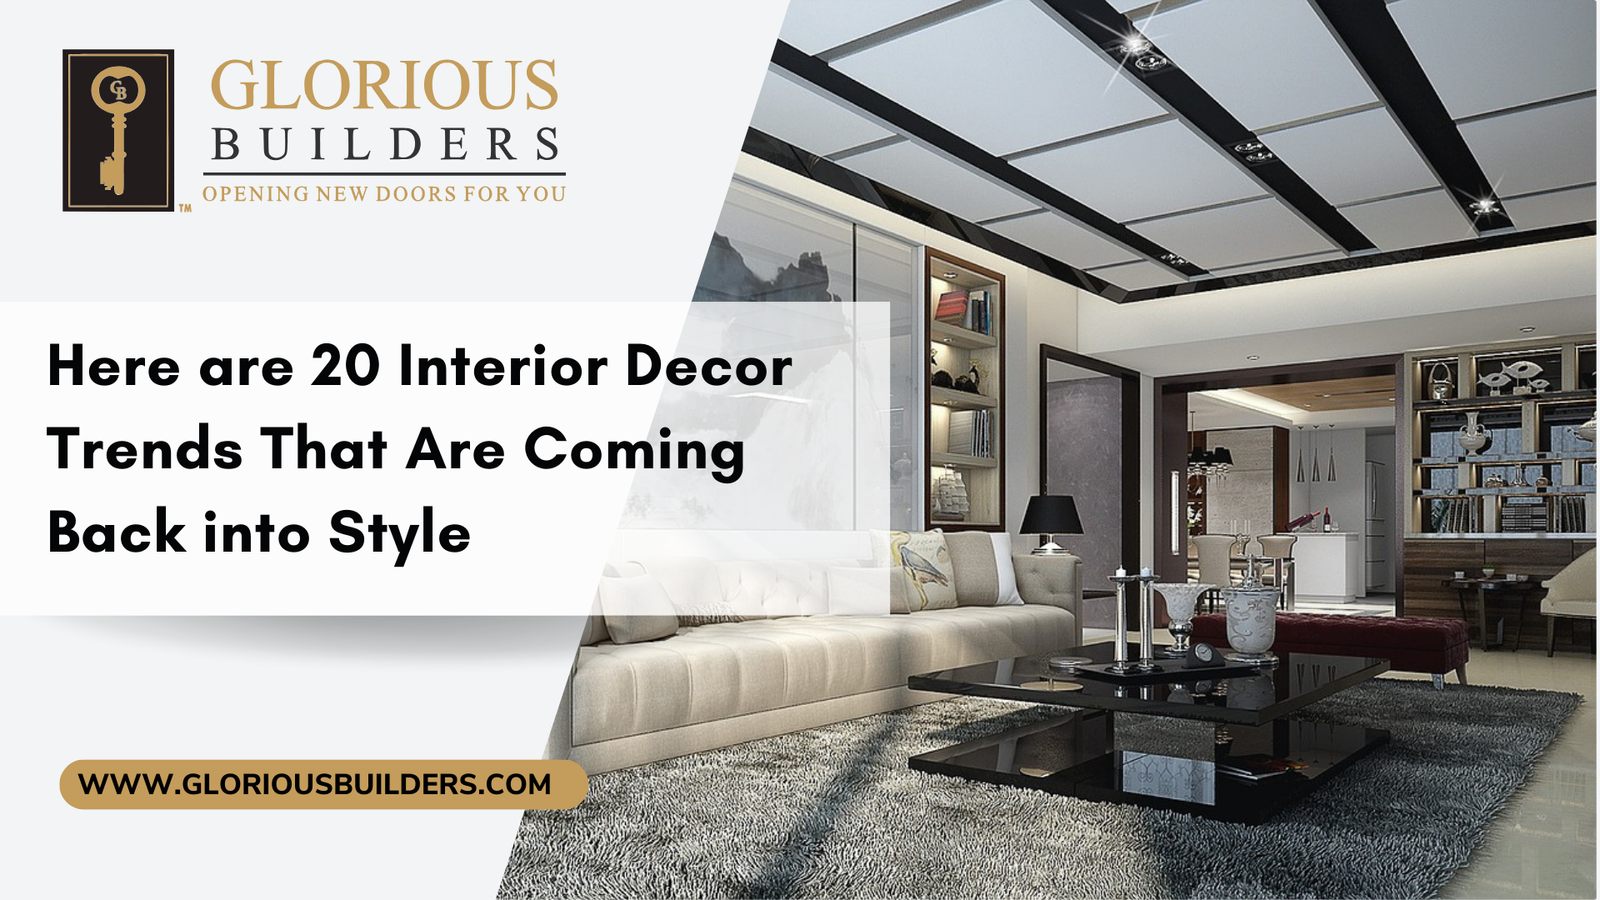 Here are 20 Interior Decor Trends That Are Coming Back into Style